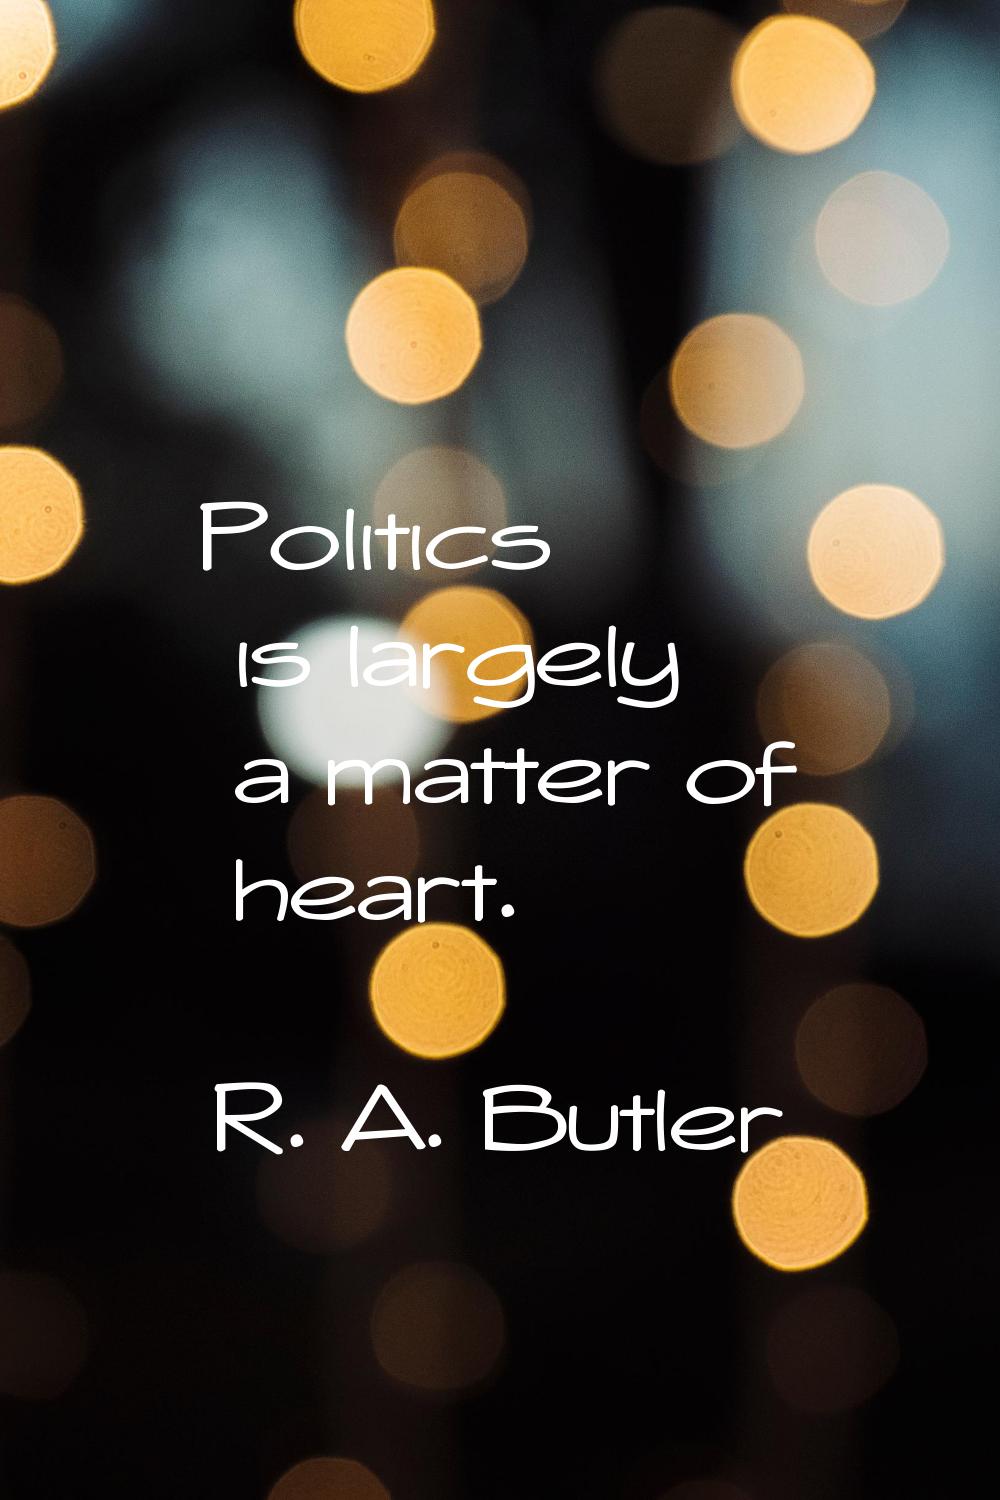 Politics is largely a matter of heart.